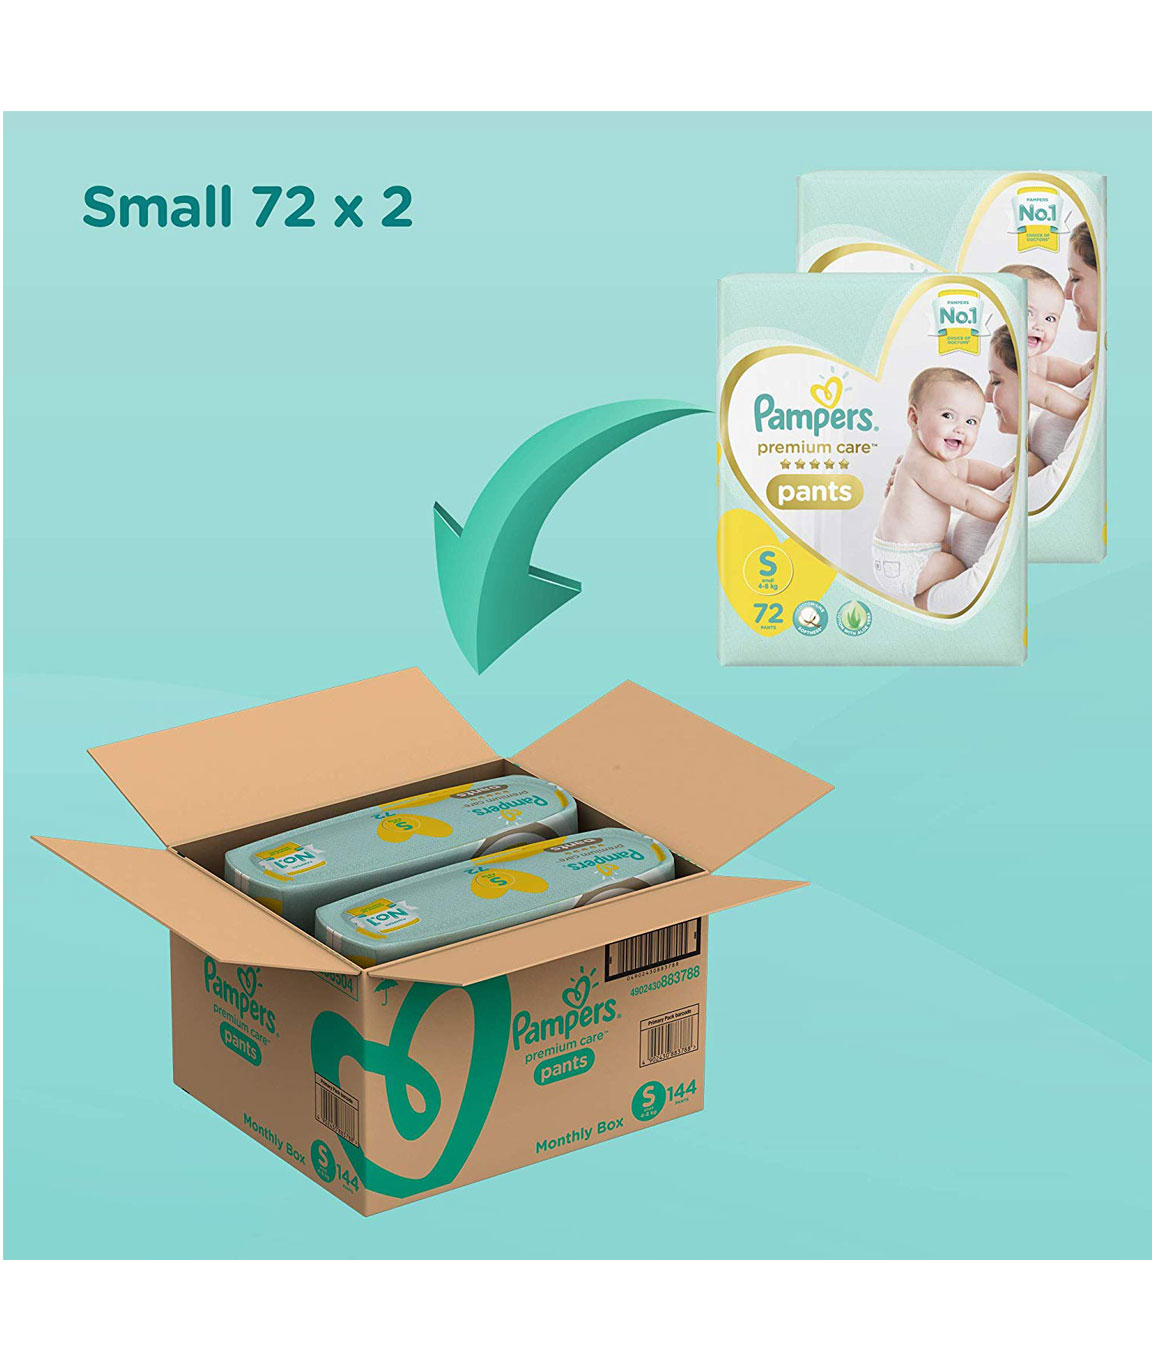 Pampers Premium Care Pants Diapers, Small, S 72 Count & Pampers Premium  Care Pants Diapers, M... | Pampers premium care, Pampers, Diaper